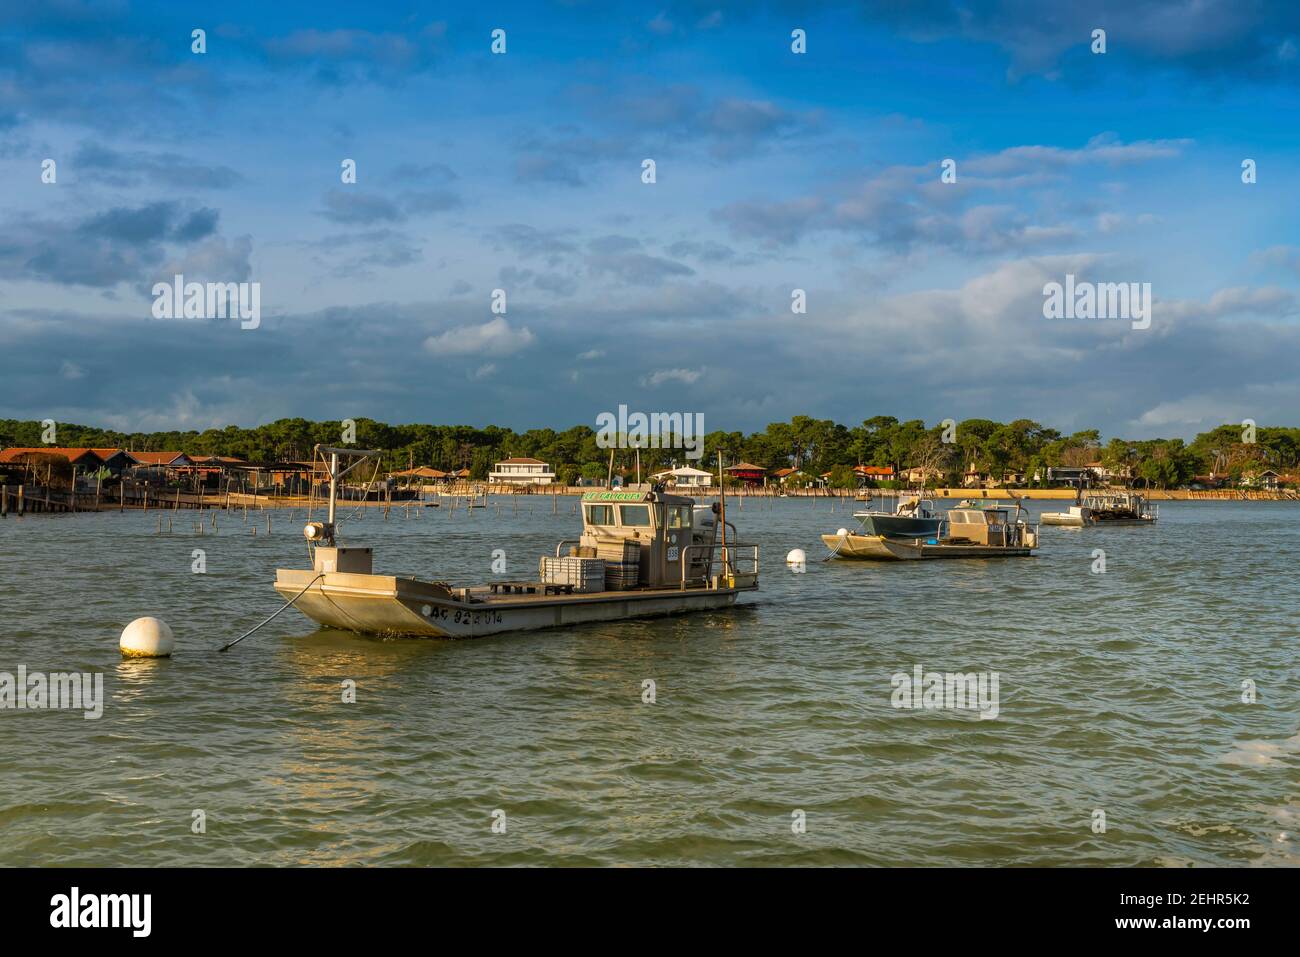 Boats in the Arcachon Basin in Gironde, Nouvelle-Aquitaine, France Stock Photo